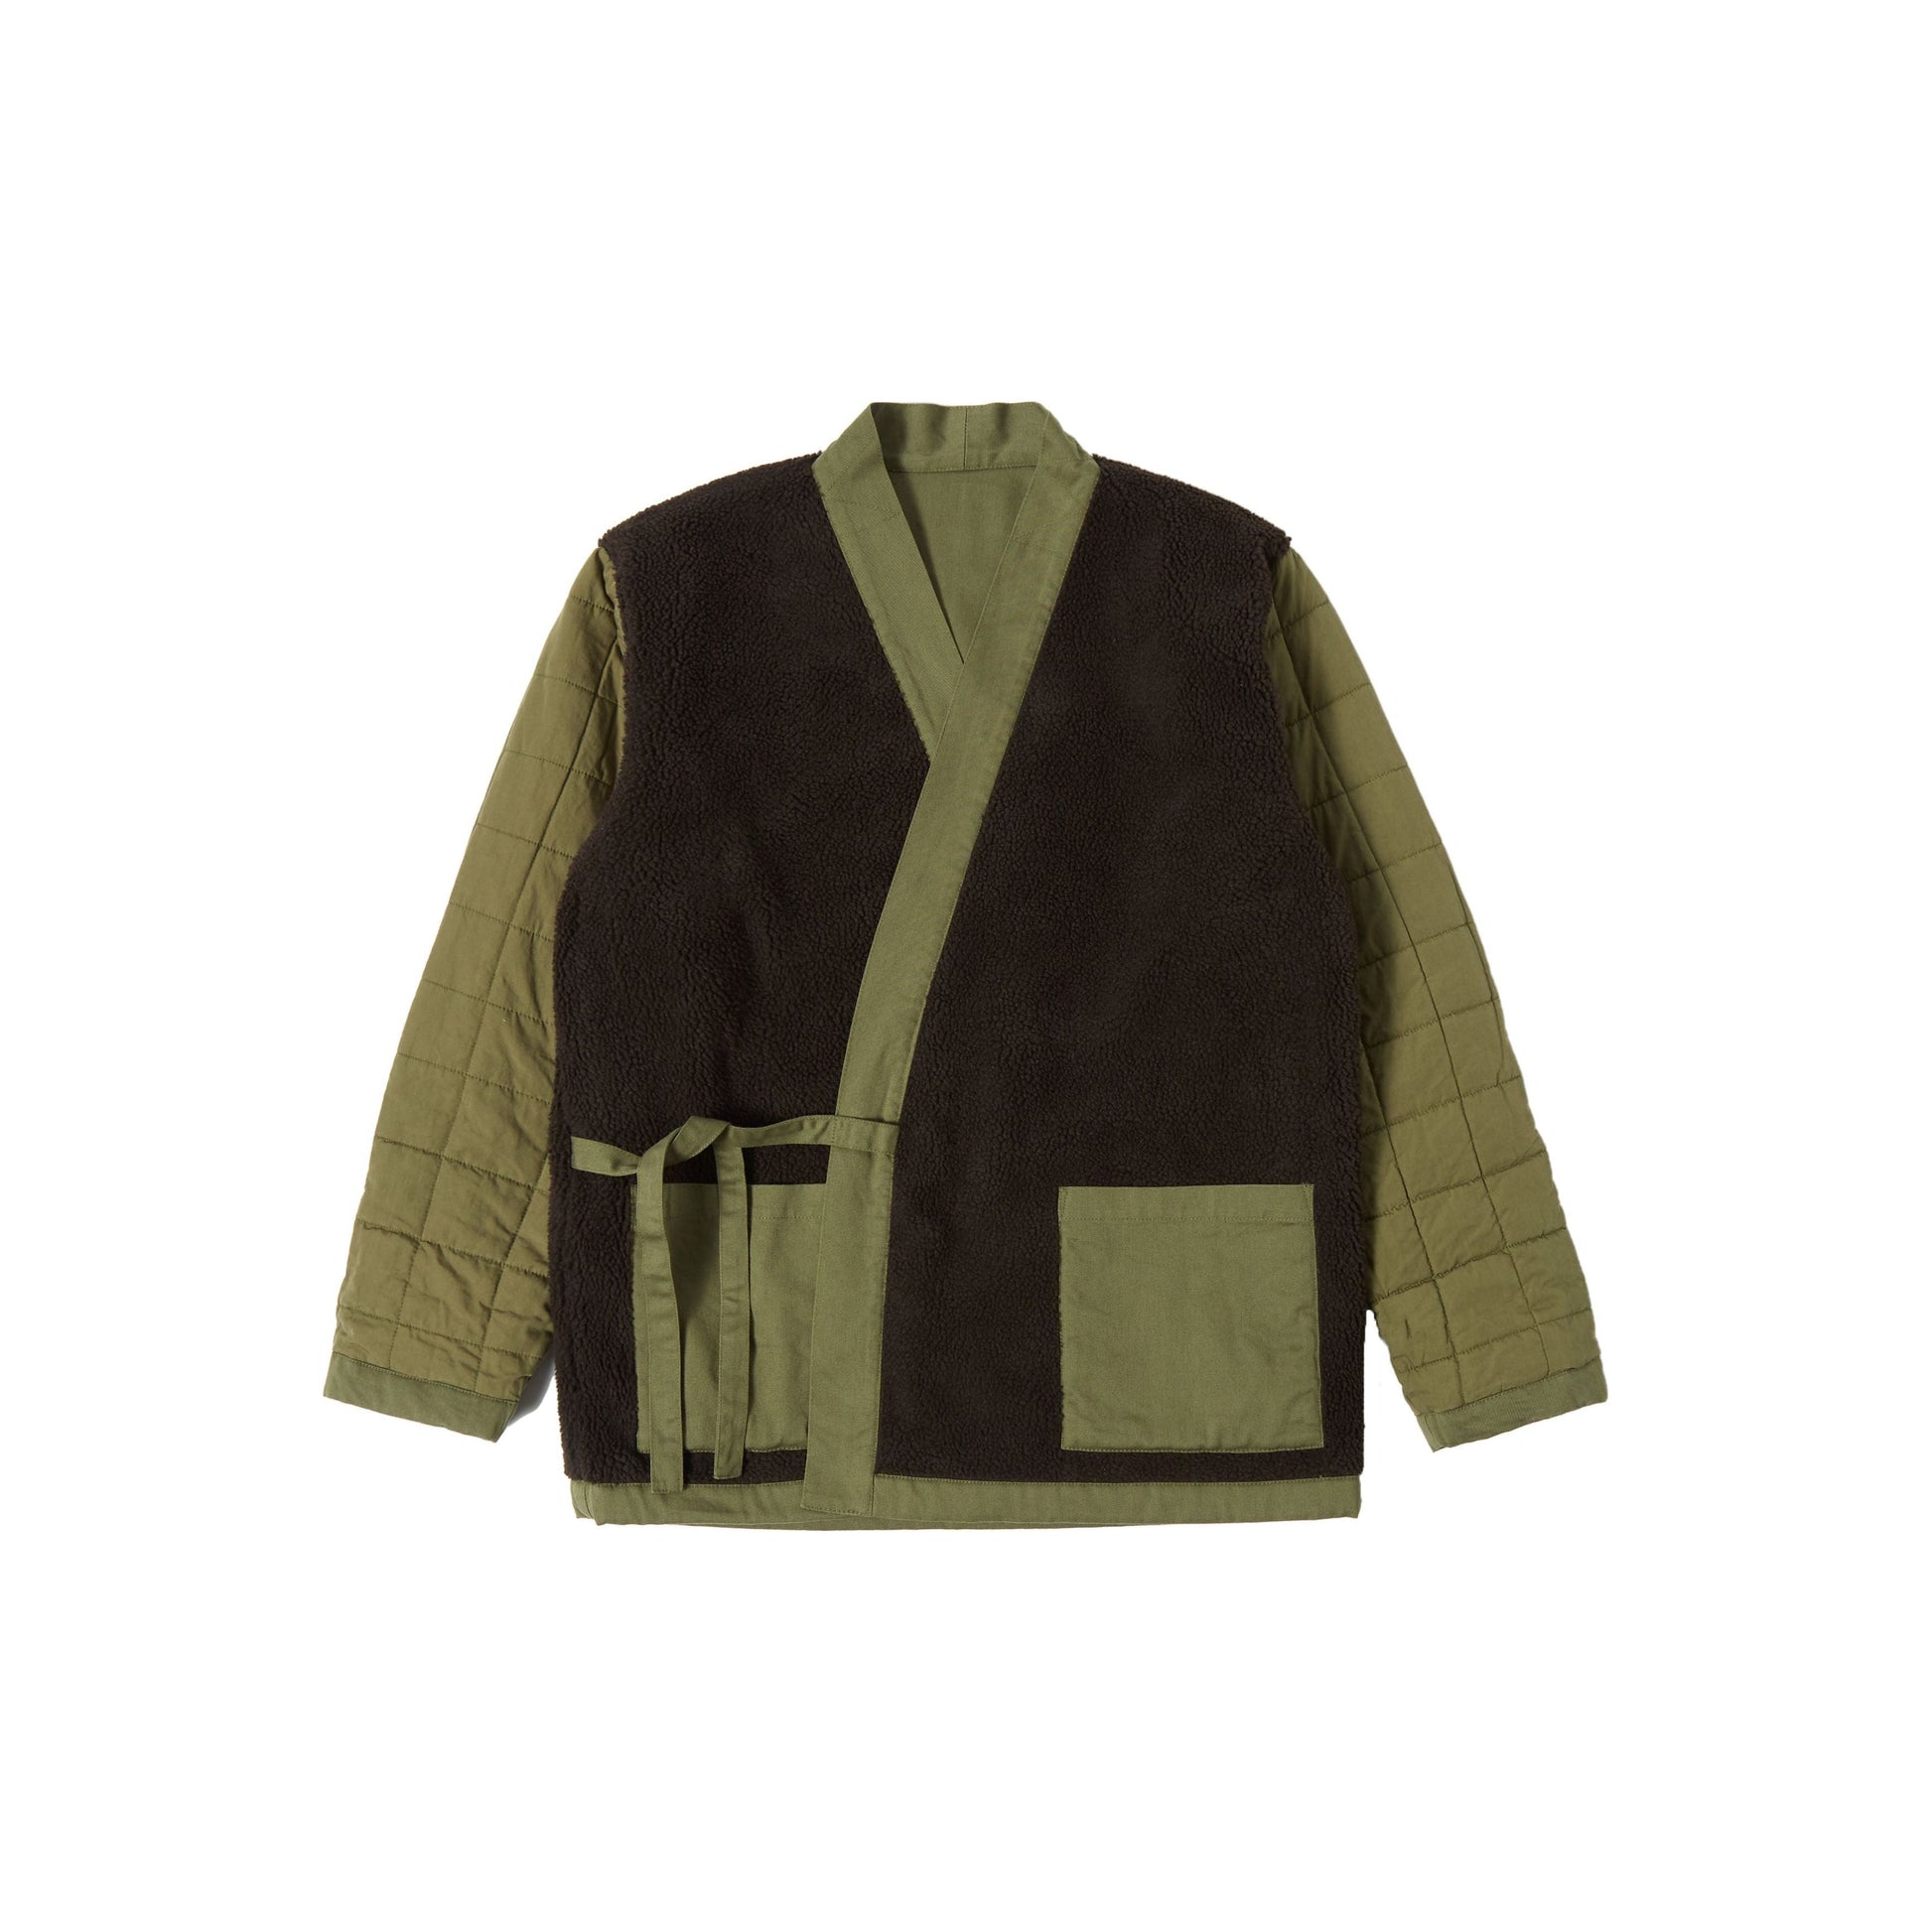 Dark green and brown quilted, Universal Works Reversible Kyoto Work Jacket displayed against a white background.